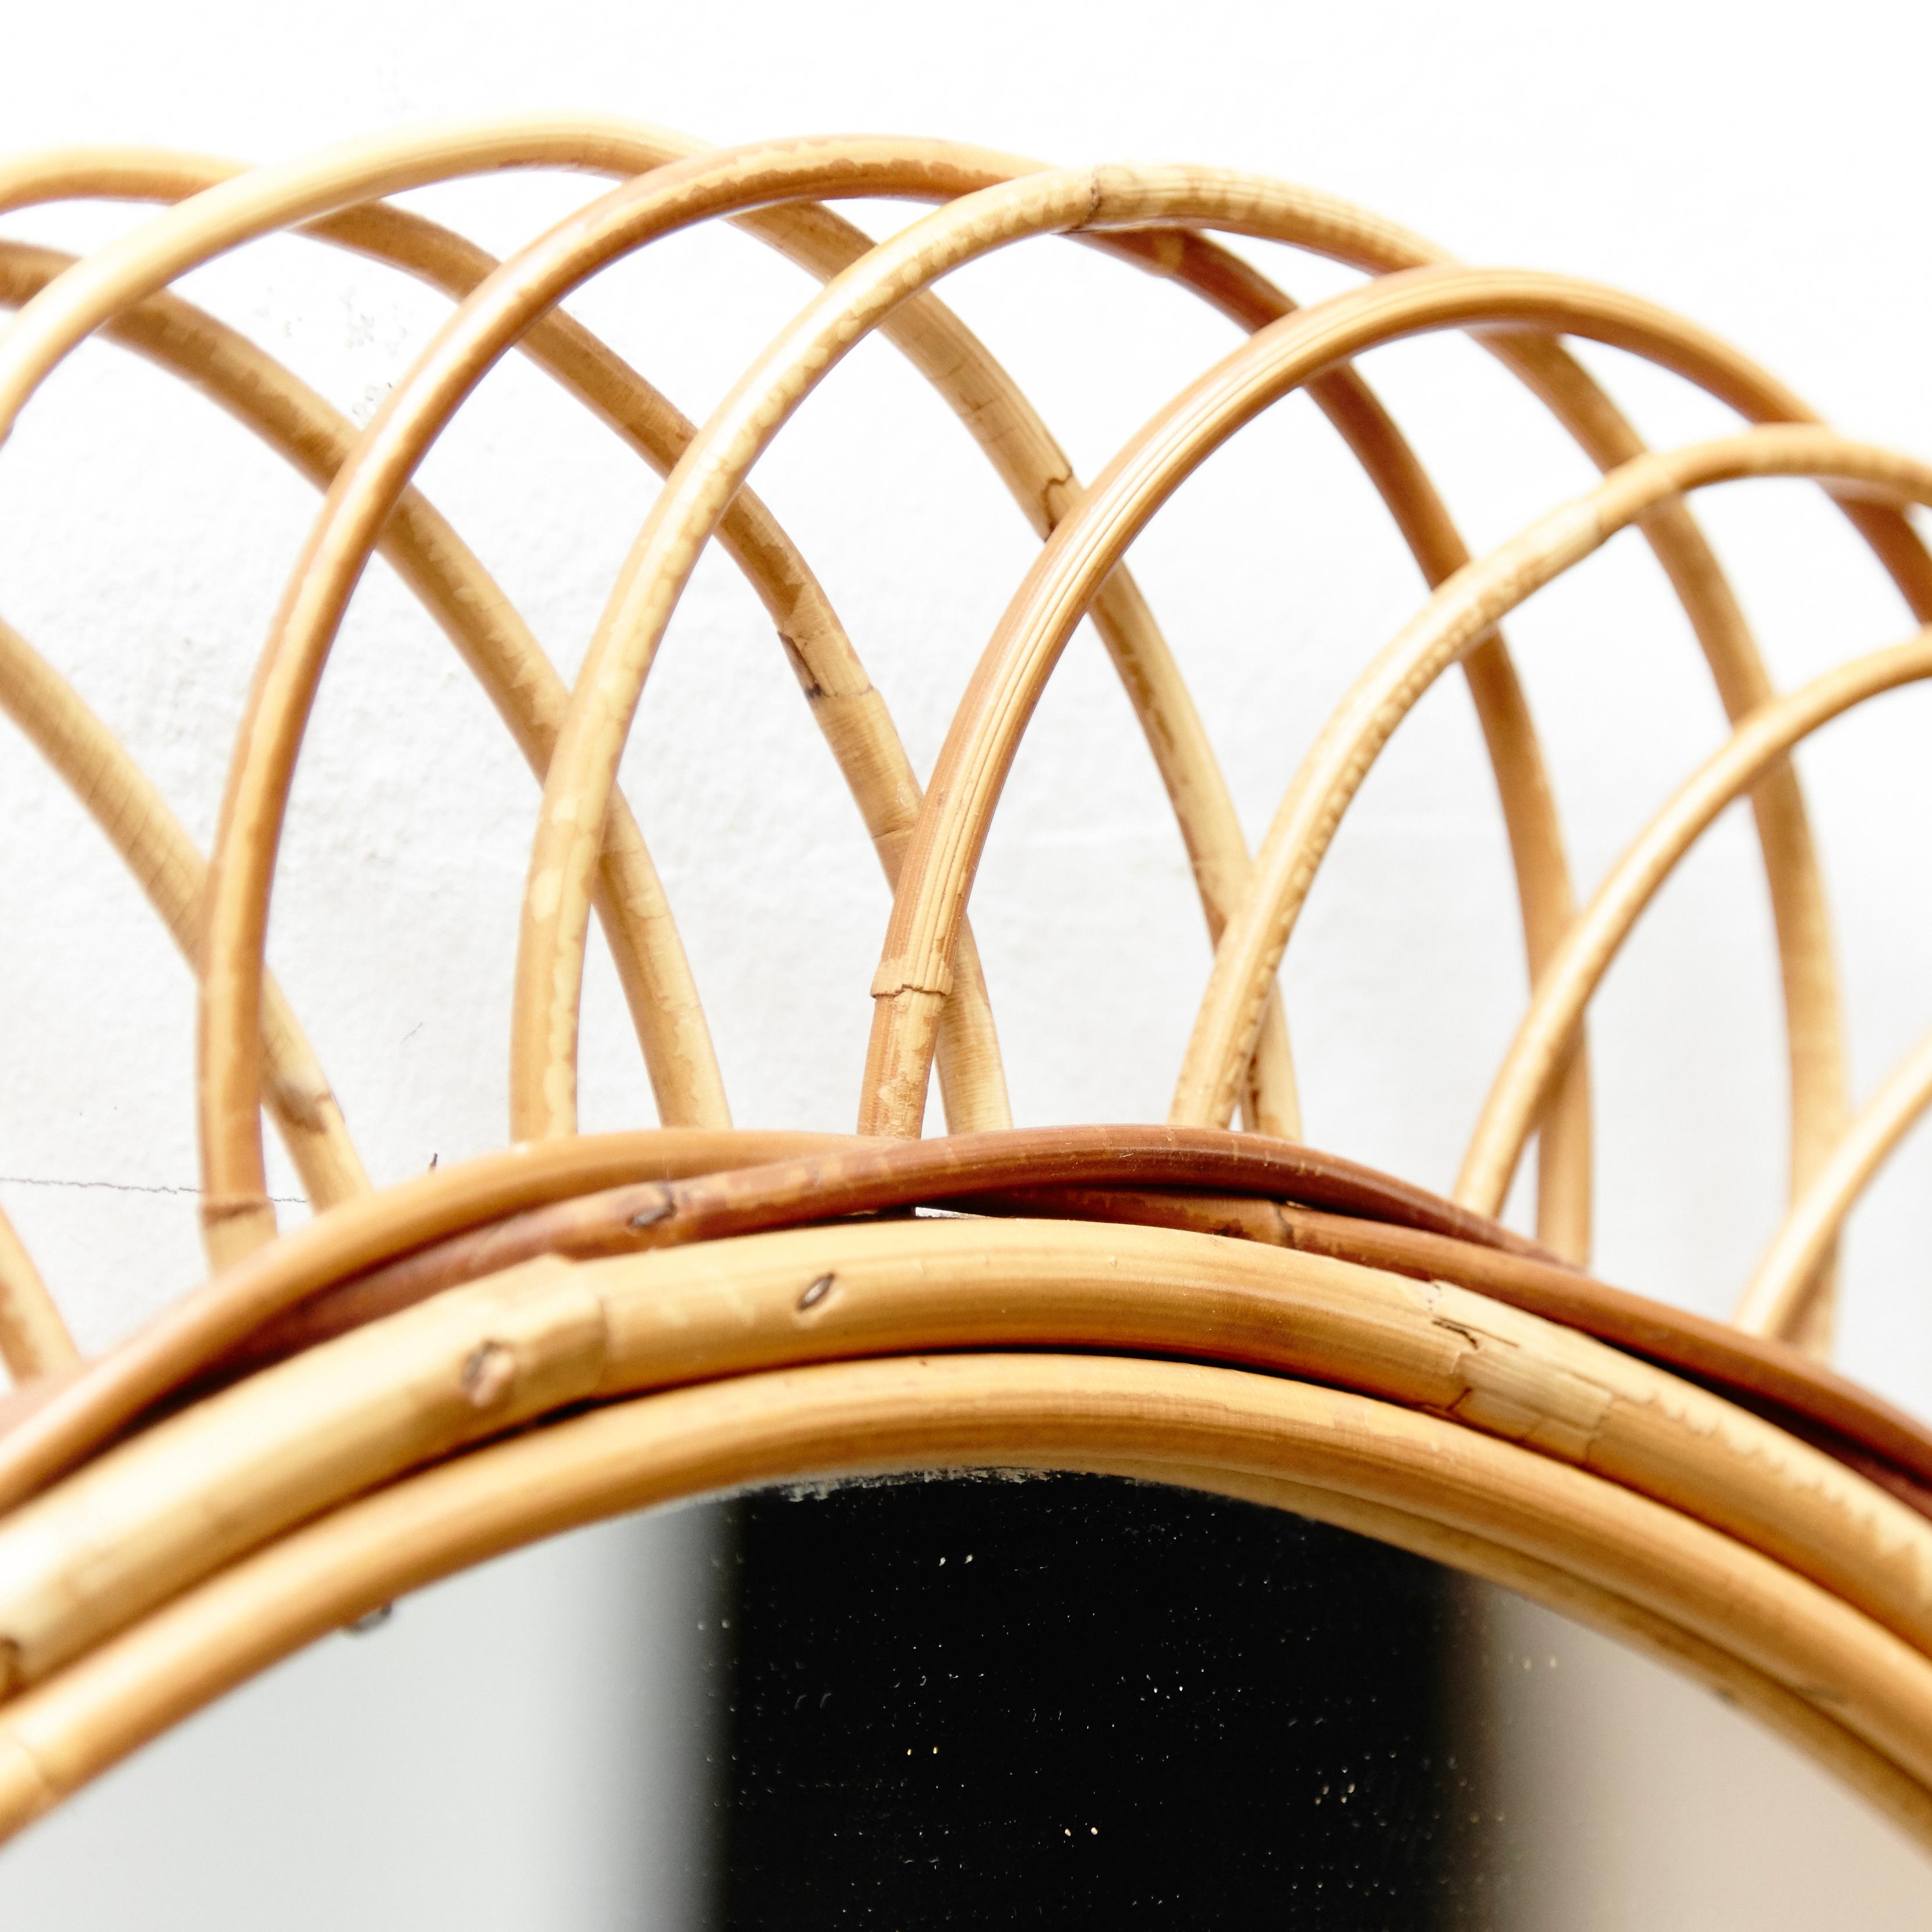 Mid-Century Modern Mirror Bamboo Rattan Handcrafted French Riviera, circa 1960 In Good Condition For Sale In Barcelona, Barcelona